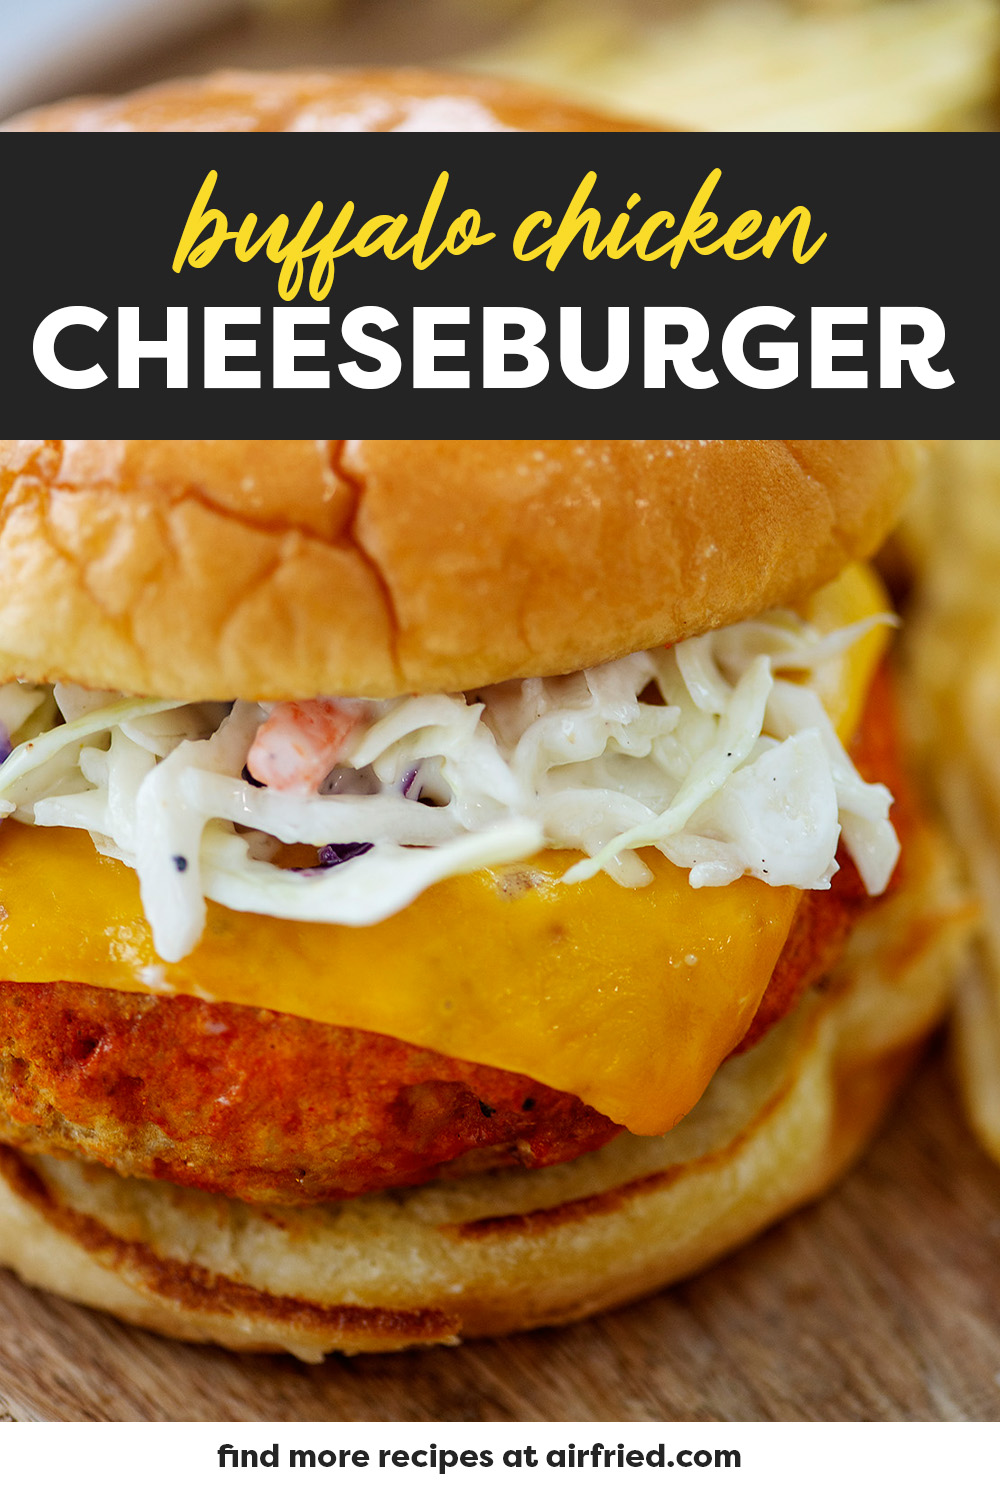 This buffalo chicken burger can be customized to your preferred heat level!  And the texture is great coming from the air fryer!